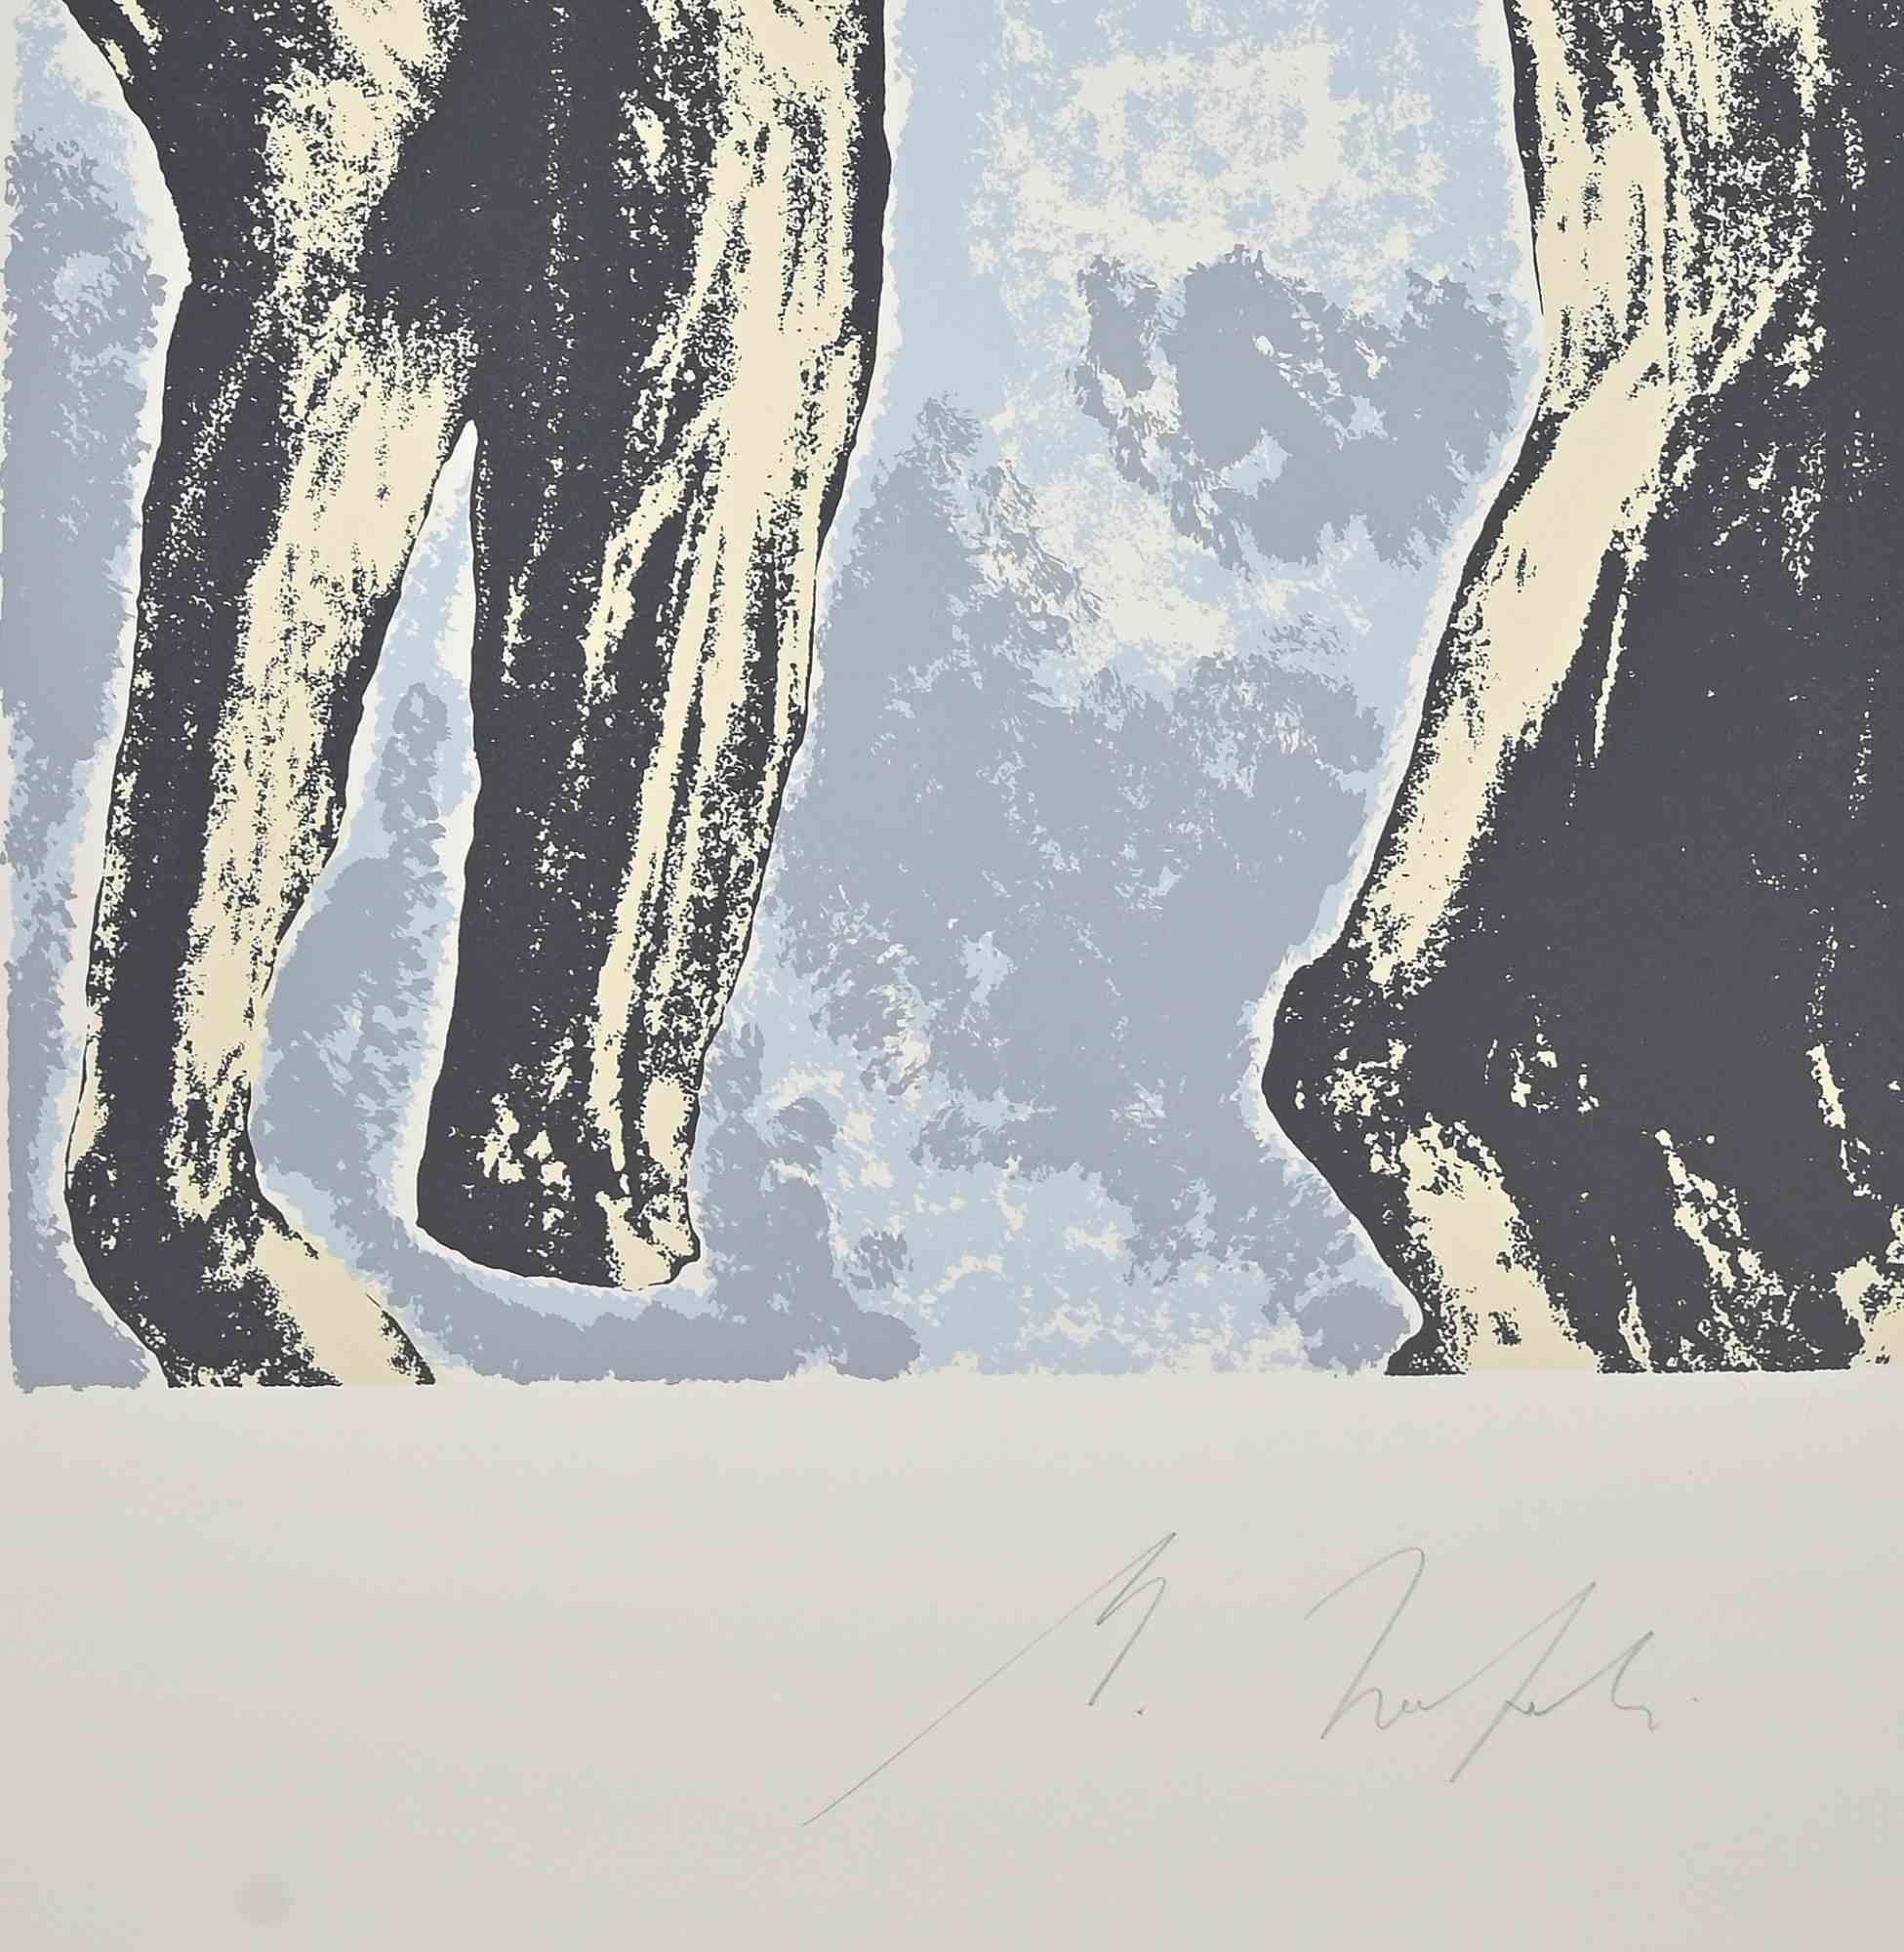 Composition is a  Lithograph realized by Mino Trafeli in 1980s. 

Edition 16/50.

Hand signed.

Good conditions.

 

Mino Trafeli (Volterra, December 29, 1922 - Volterra, August 9, 2018) was an Italian sculptor and partisan.
Fundamental to his